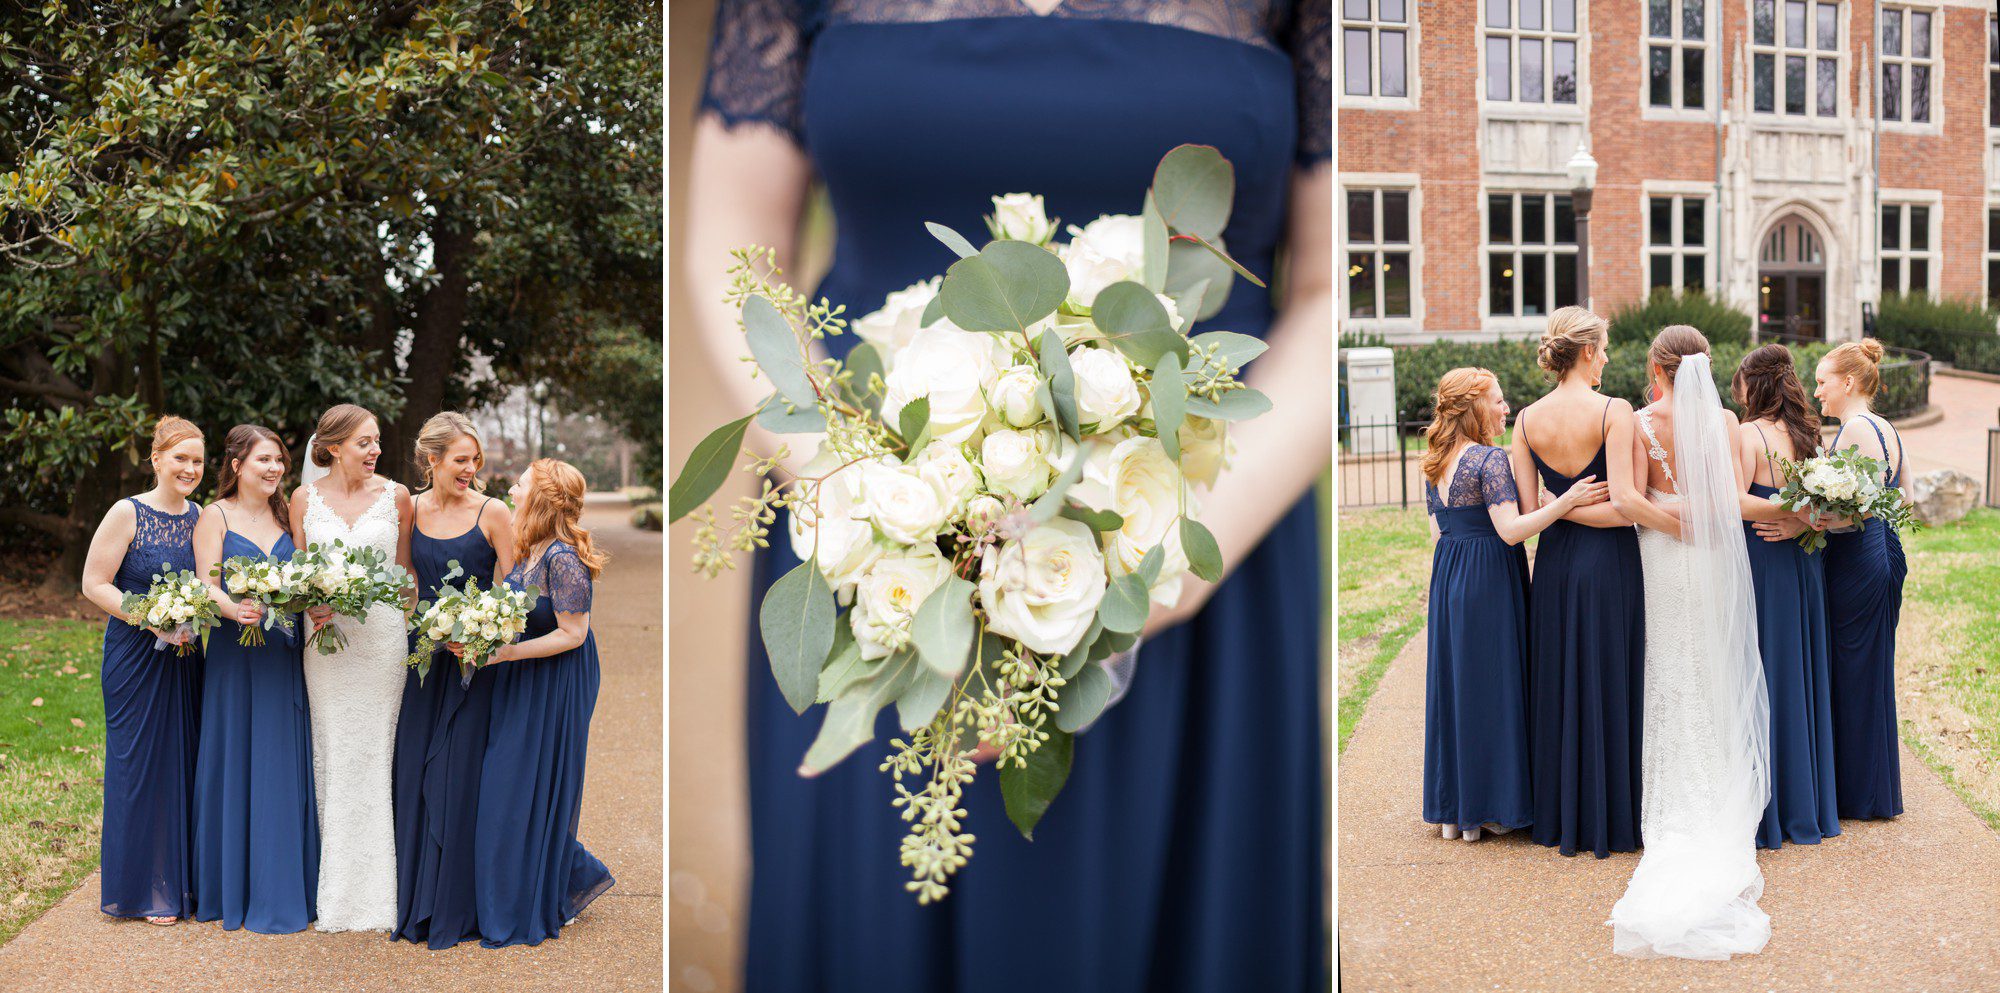 Bridesmaids in regal blue dresses outside church before the wedding ceremony at Benton Chapel in Nashville TN. Wedding photography by Krista Lee.